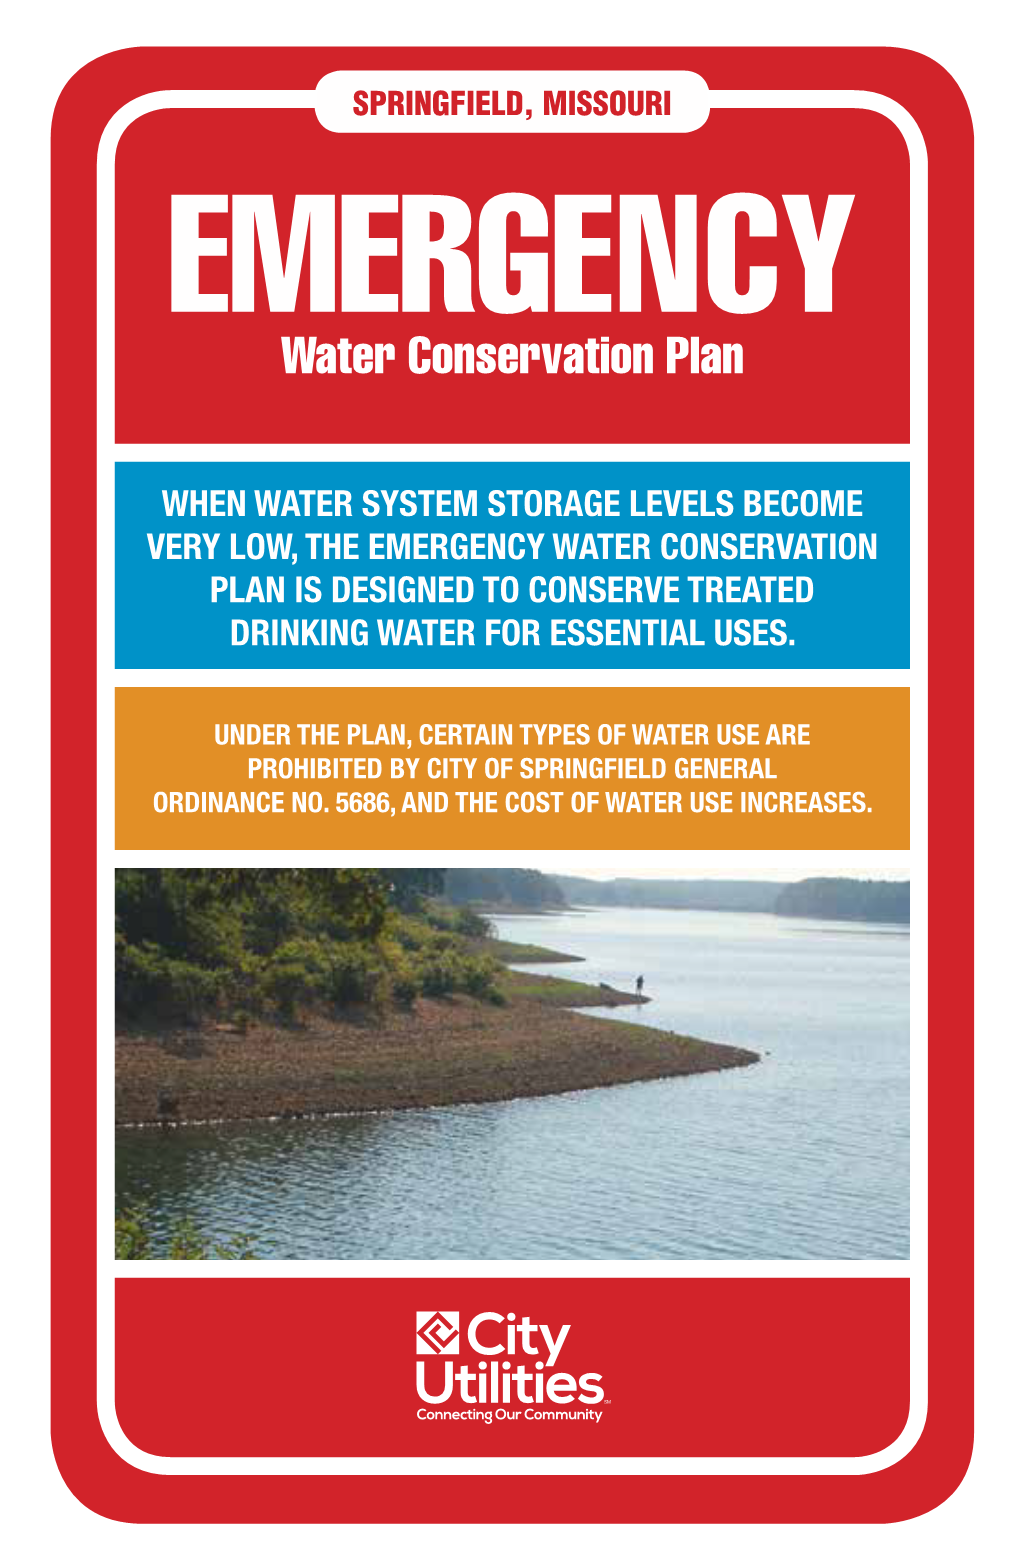 EMERGENCY Water Conservation Plan